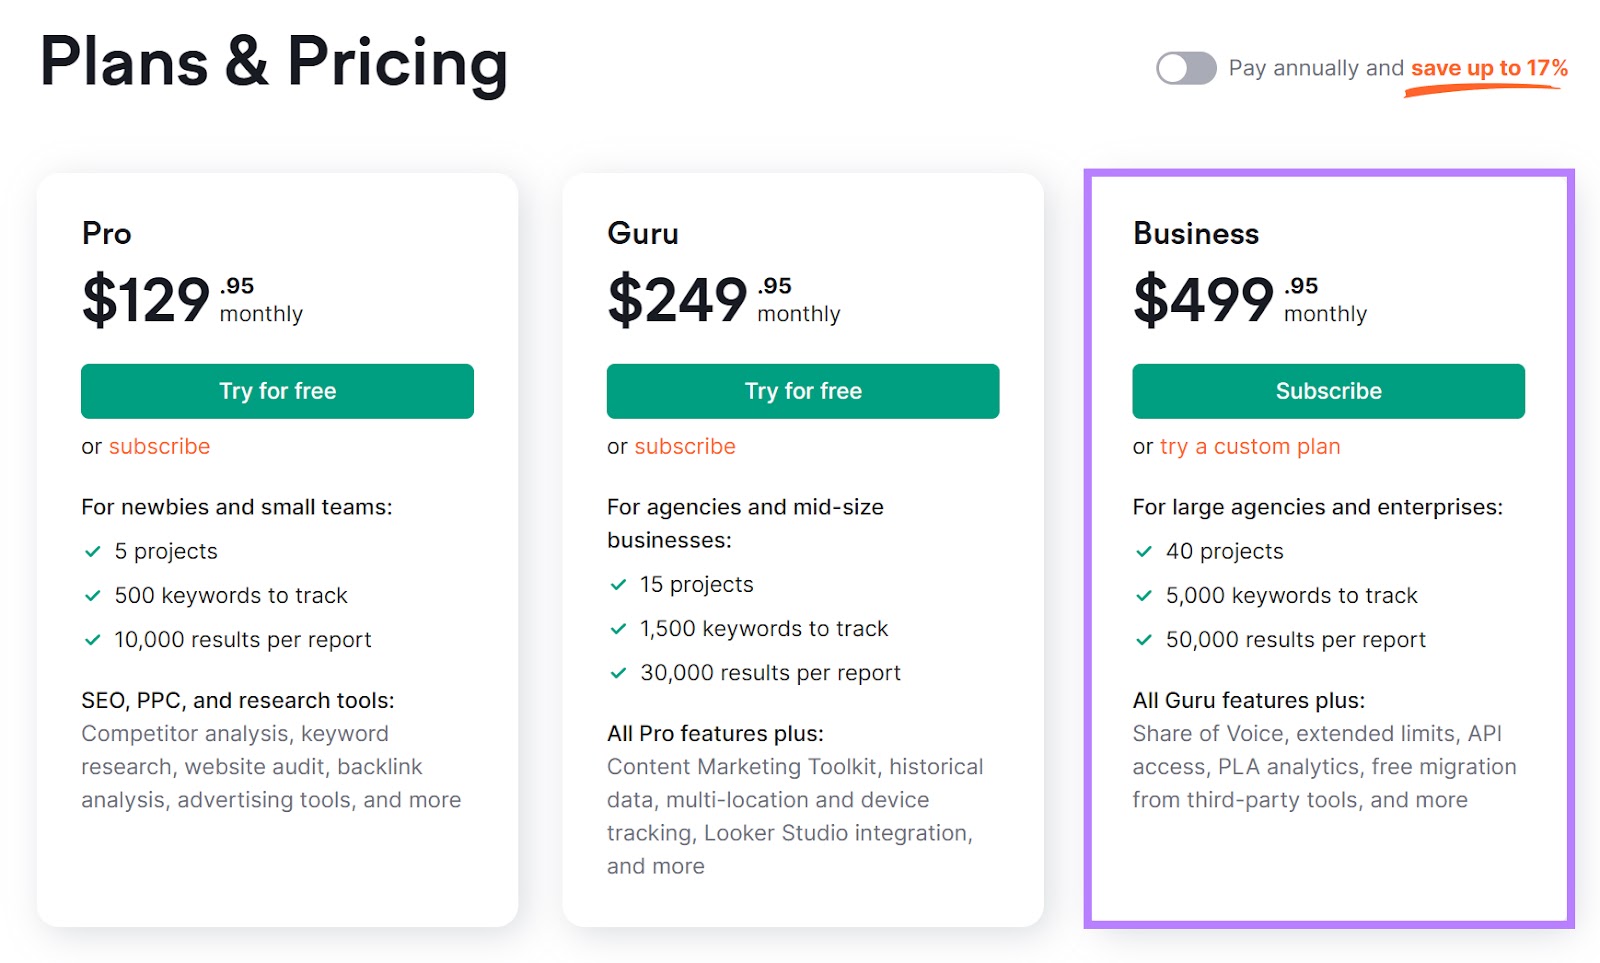 Semrush website "Plans & Pricing" section with the "Business" plan's features and pricing highlighted.